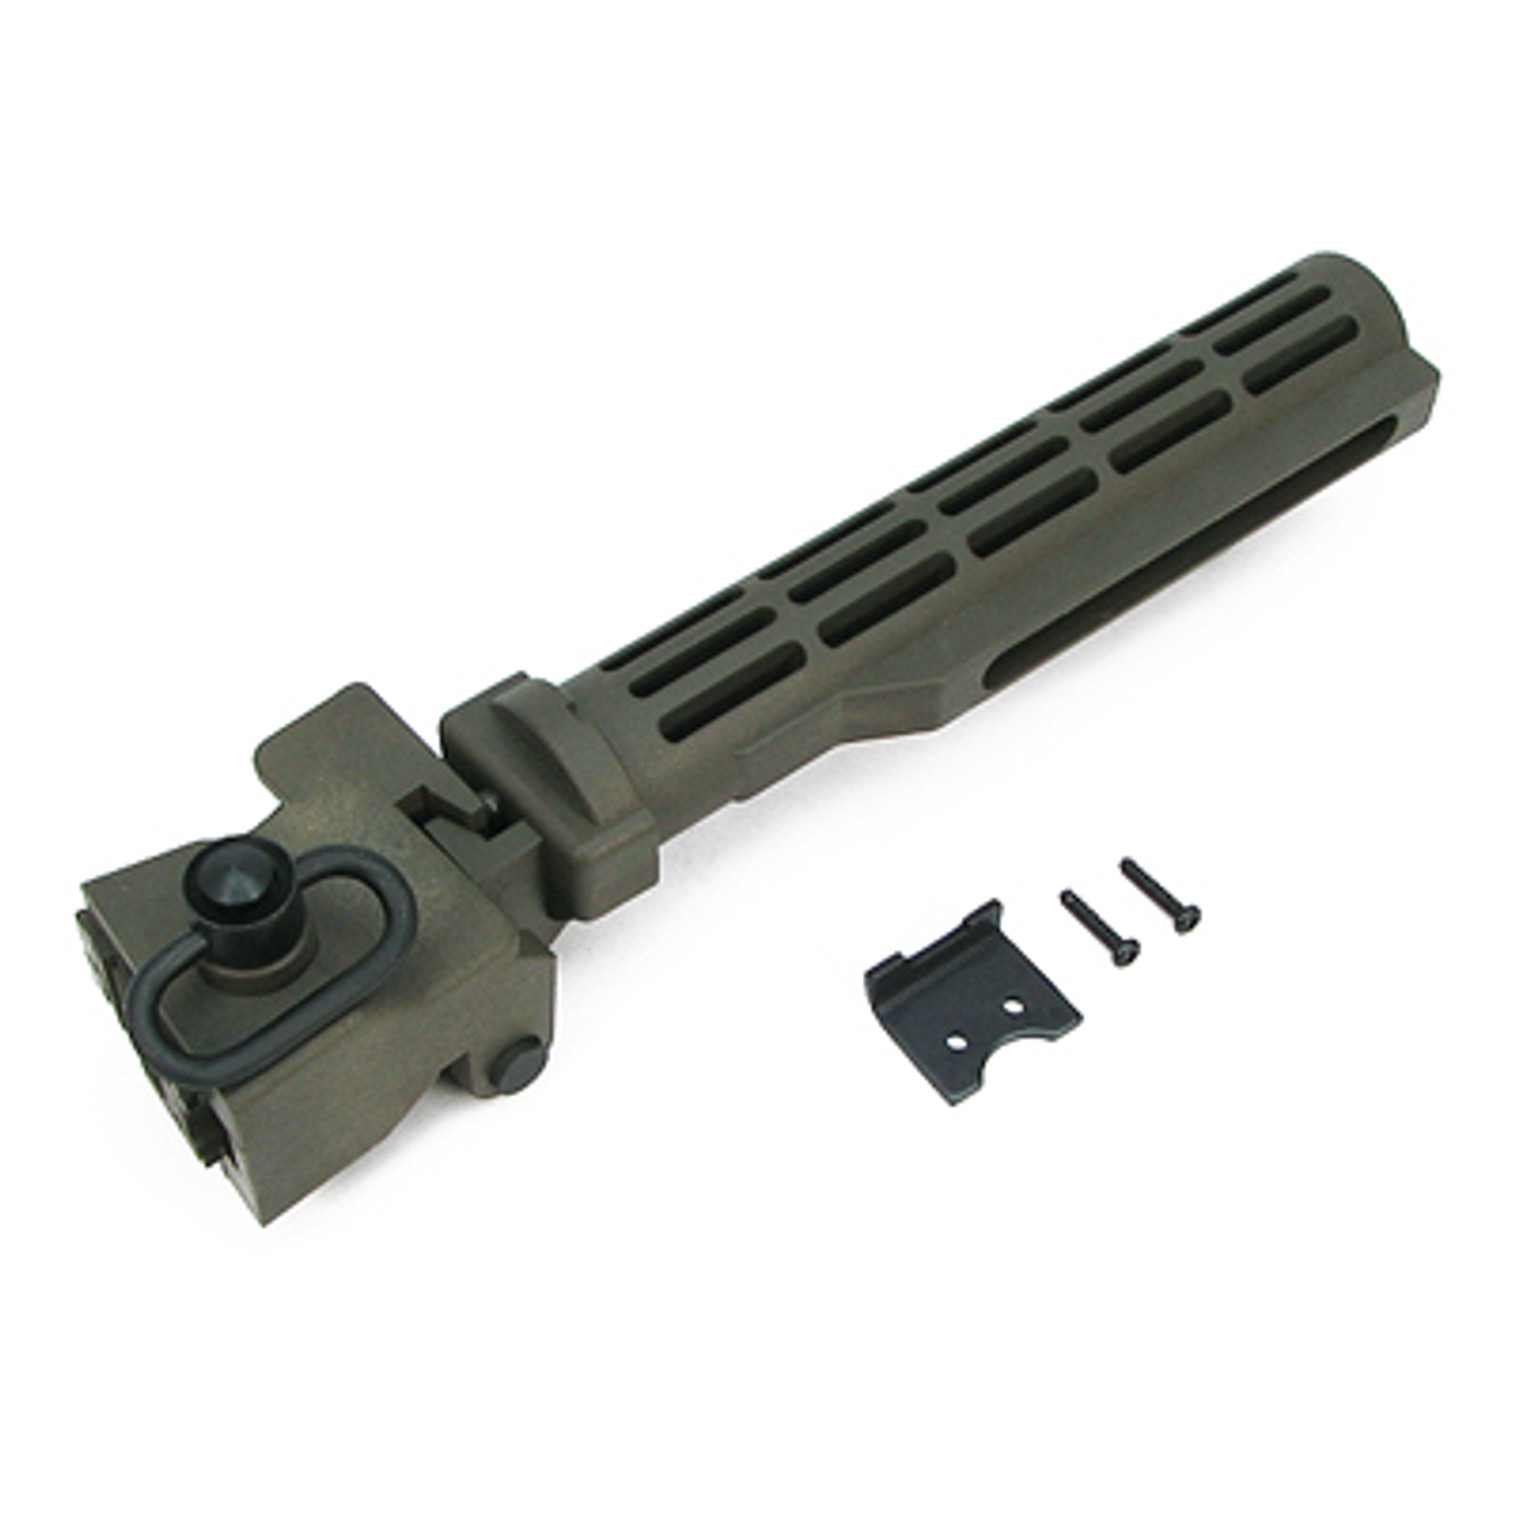 King Arms AK Tactical Folding Stock - Olive Drab